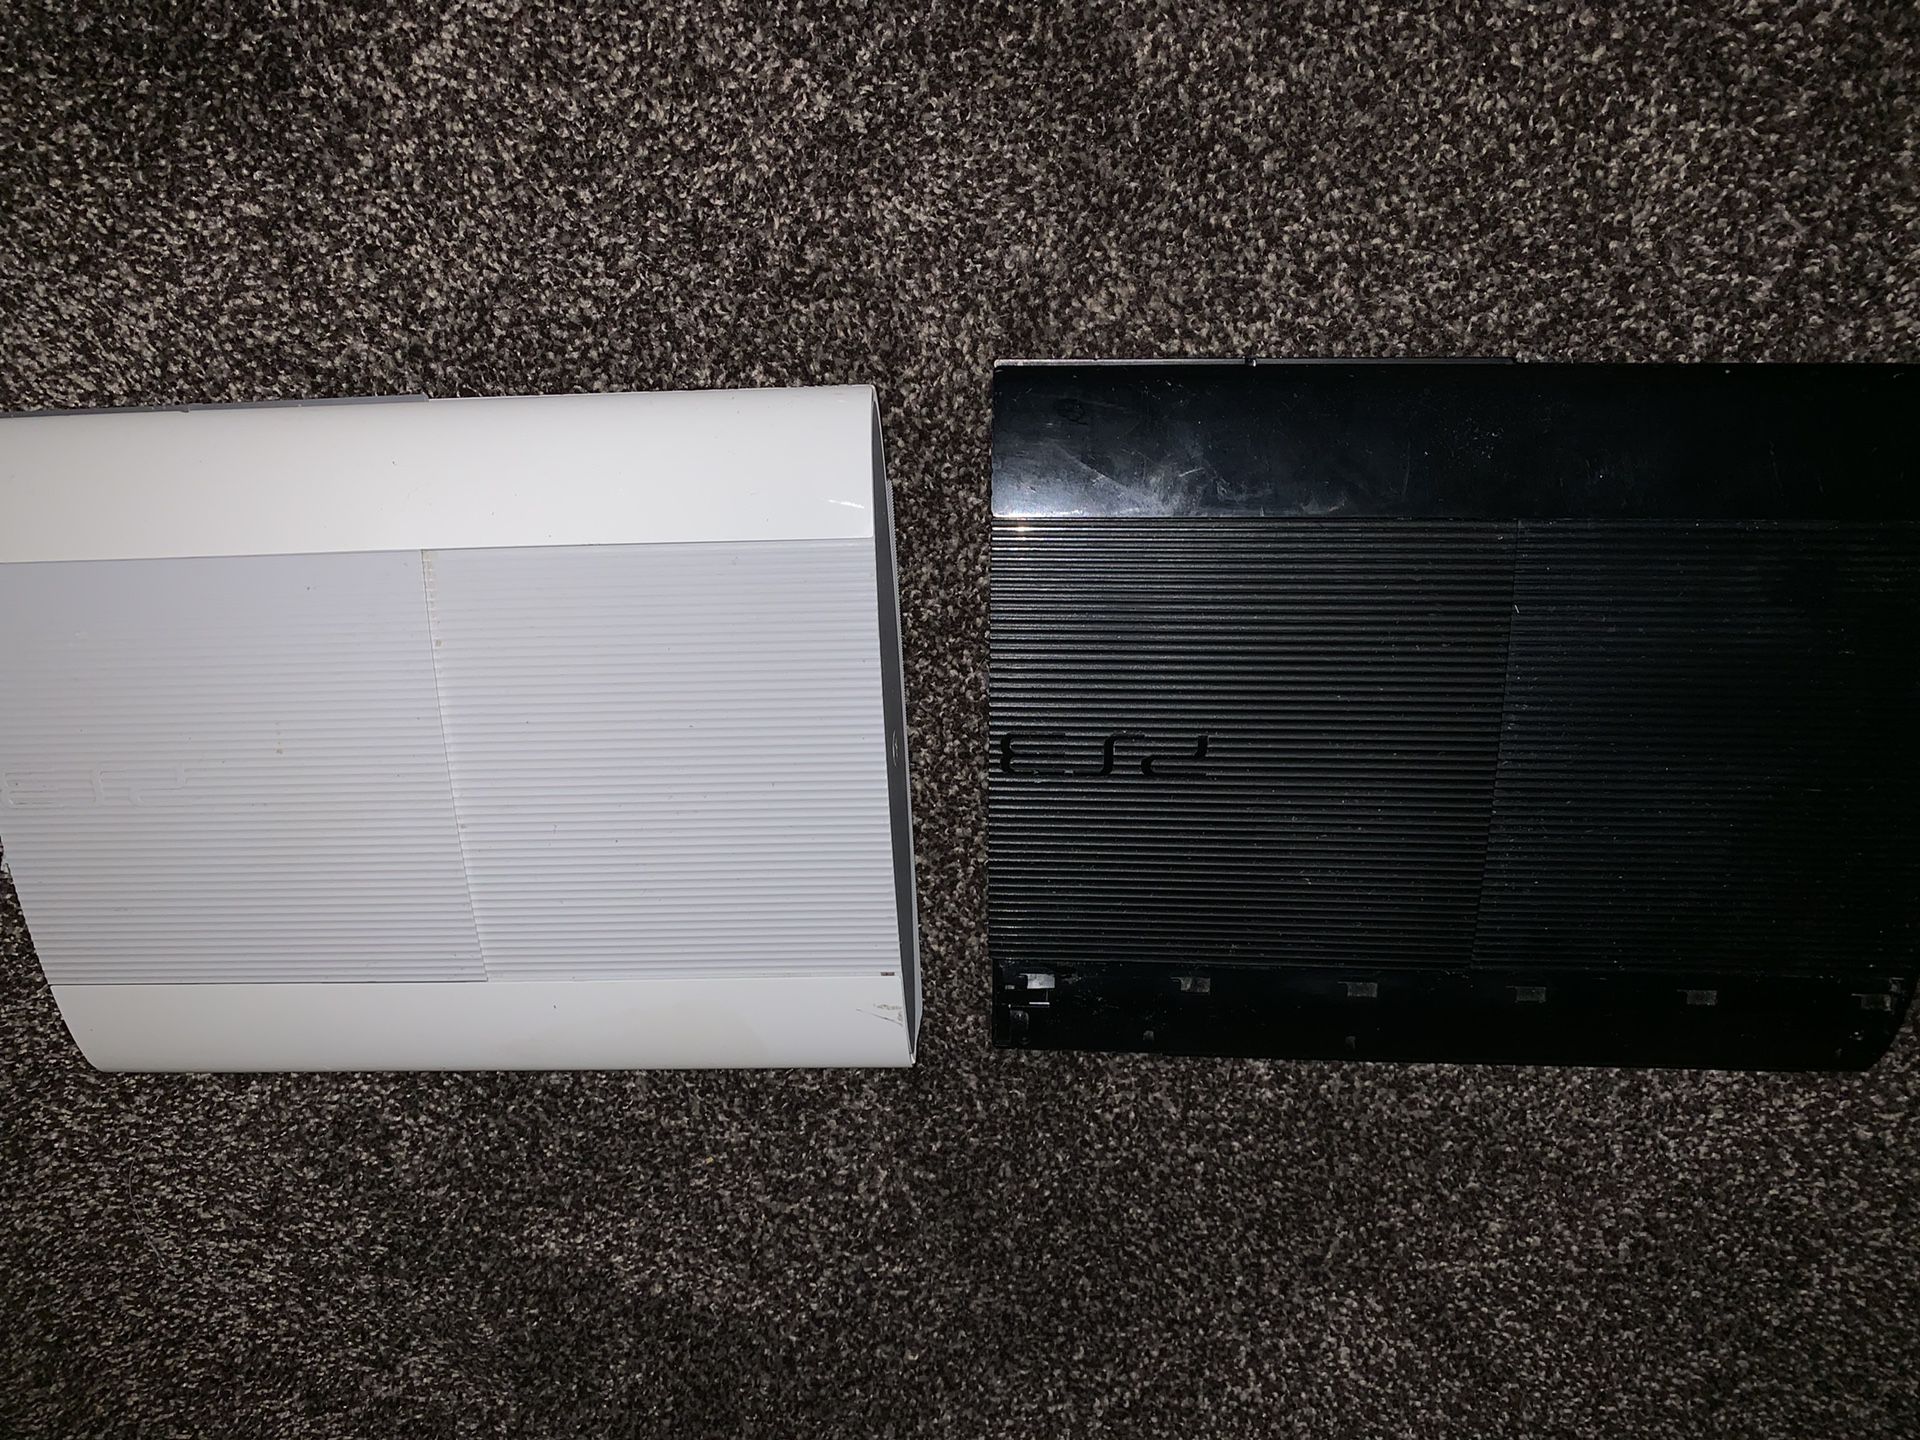 Two ps3’s